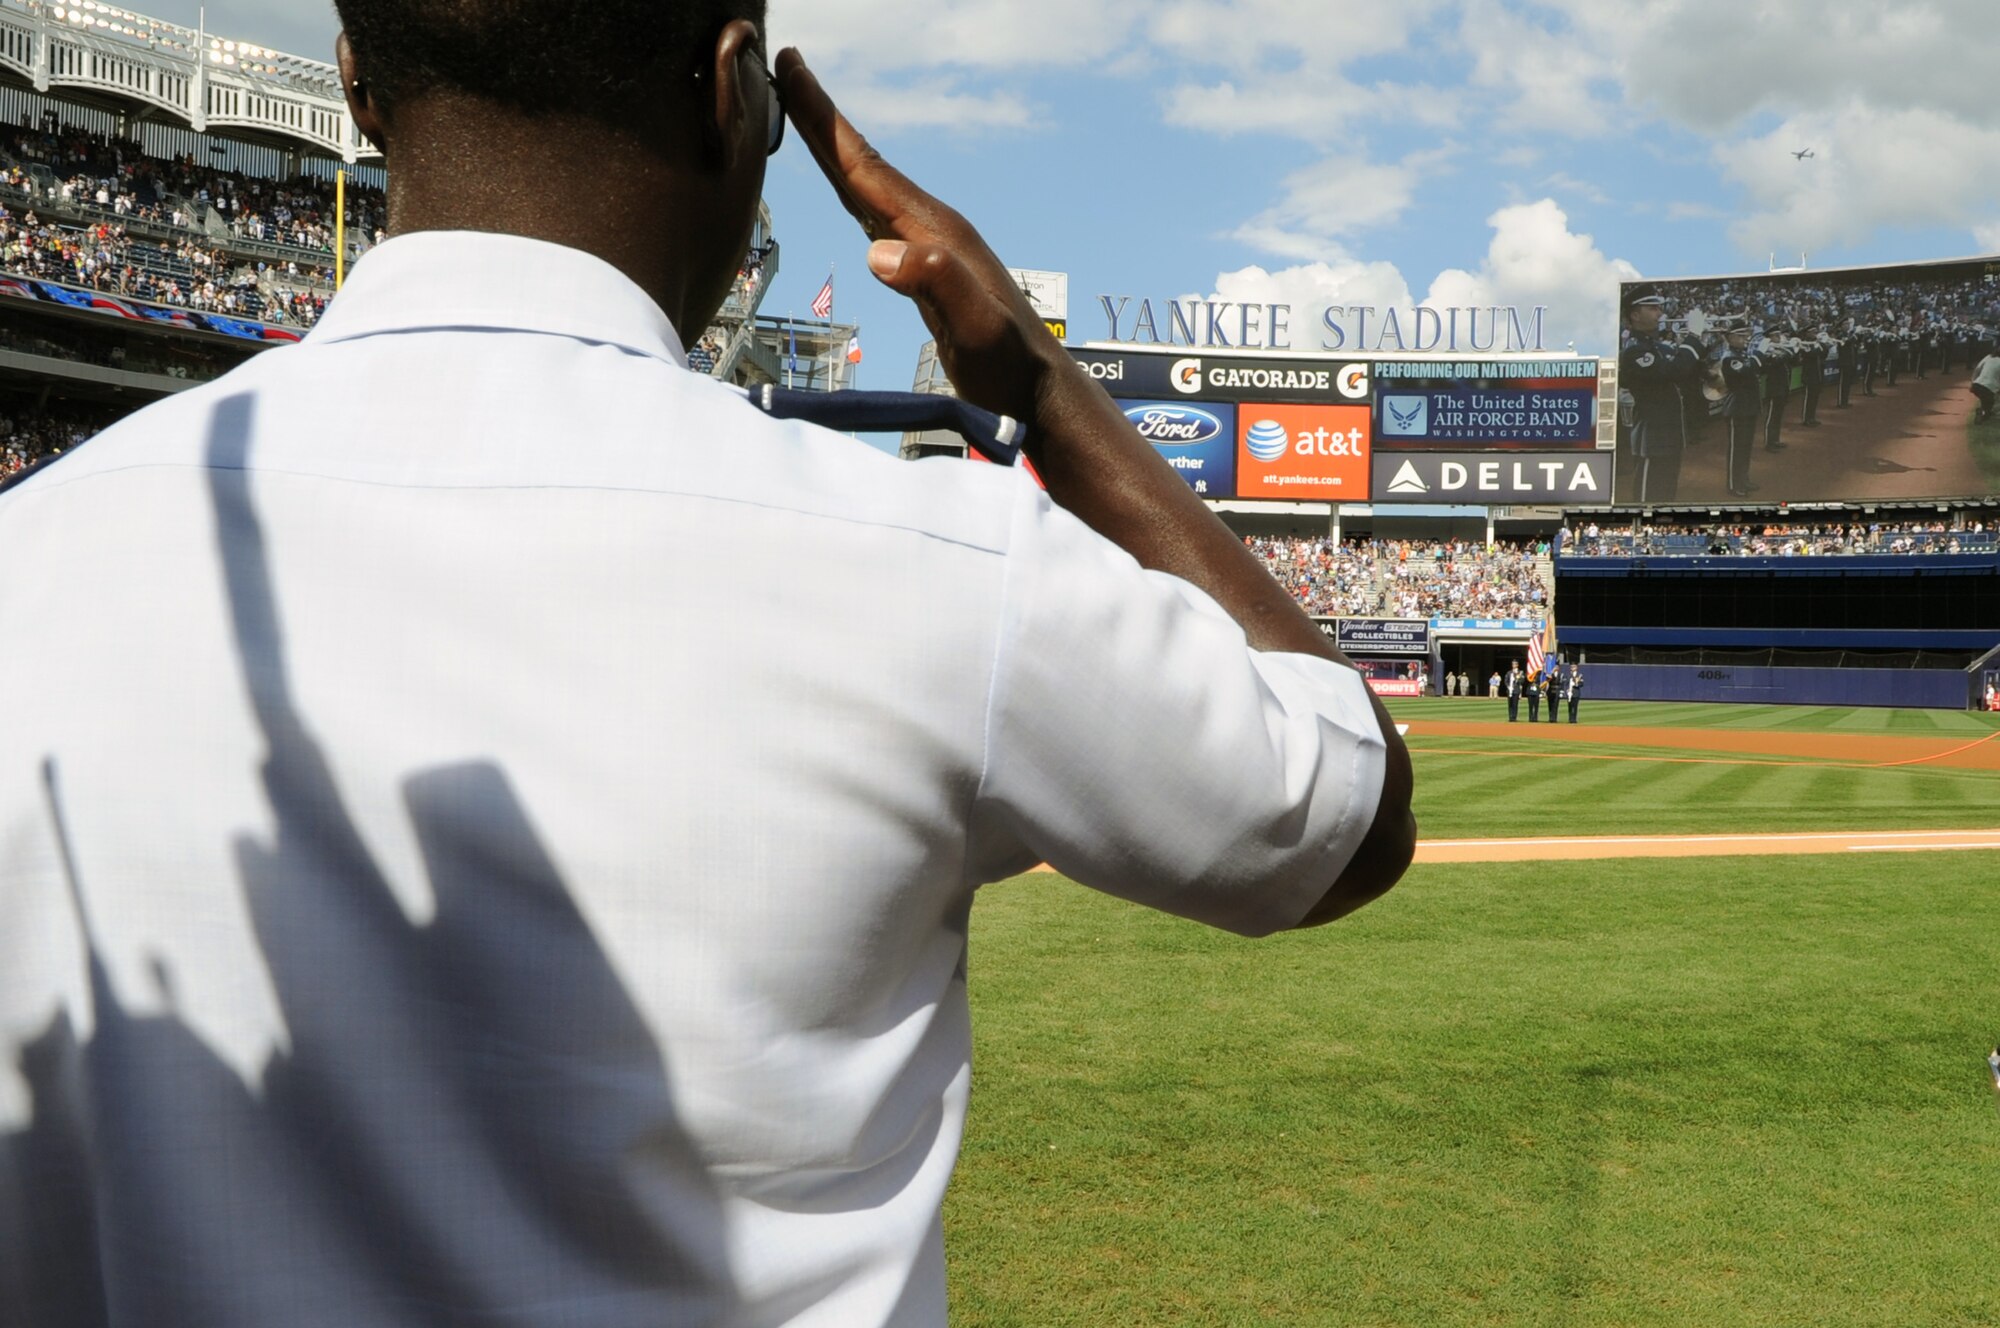 Air Education and Training Command Commander Gen. Edward A. Rice Jr. salutes the colors during the National Anthem for the Yankees vs. Red Sox game Aug. 18 at the Yankee Stadium, Bronx, N.Y. The U.S. Air Force Band and U.S. Air Force Honor Guard performed during the opening ceremony, kicking off their participation in Air Force Week 2012. (U.S. Air Force photo by Senior Airman Tabitha N. Haynes) 